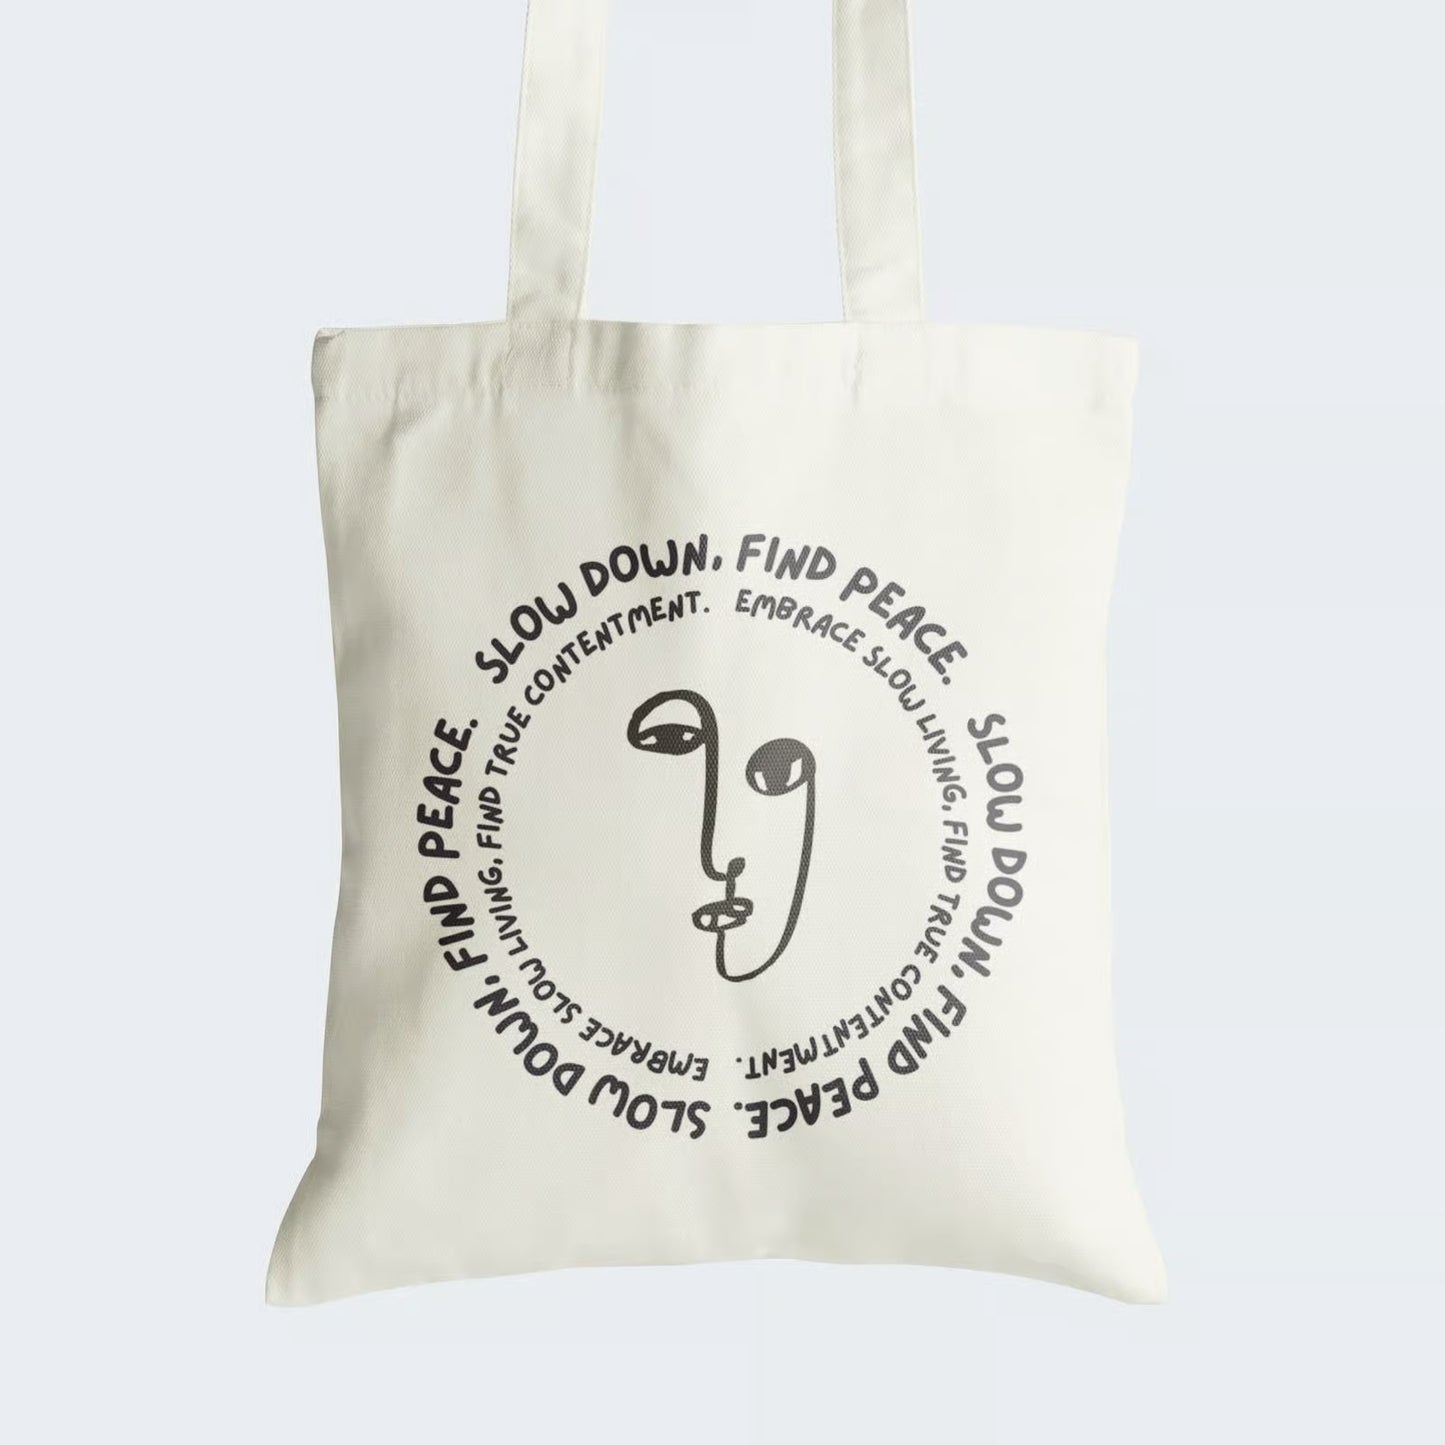 Elevate your style and embrace mindfulness with our "Slow Down, Find Peace" Cotton Canvas Tote Bag. This tote features a tranquil line art face, encircled by two concentric messages: "Slow Down, Find Peace" and "Embrace Slow Living, Find True Contentment." Crafted for durability and style, it includes a secure zipper closure for daily convenience. Carry the message of inner serenity and mindfulness with our meaningful Cotton Canvas Tote Bag. Order yours today and find peace in every step!